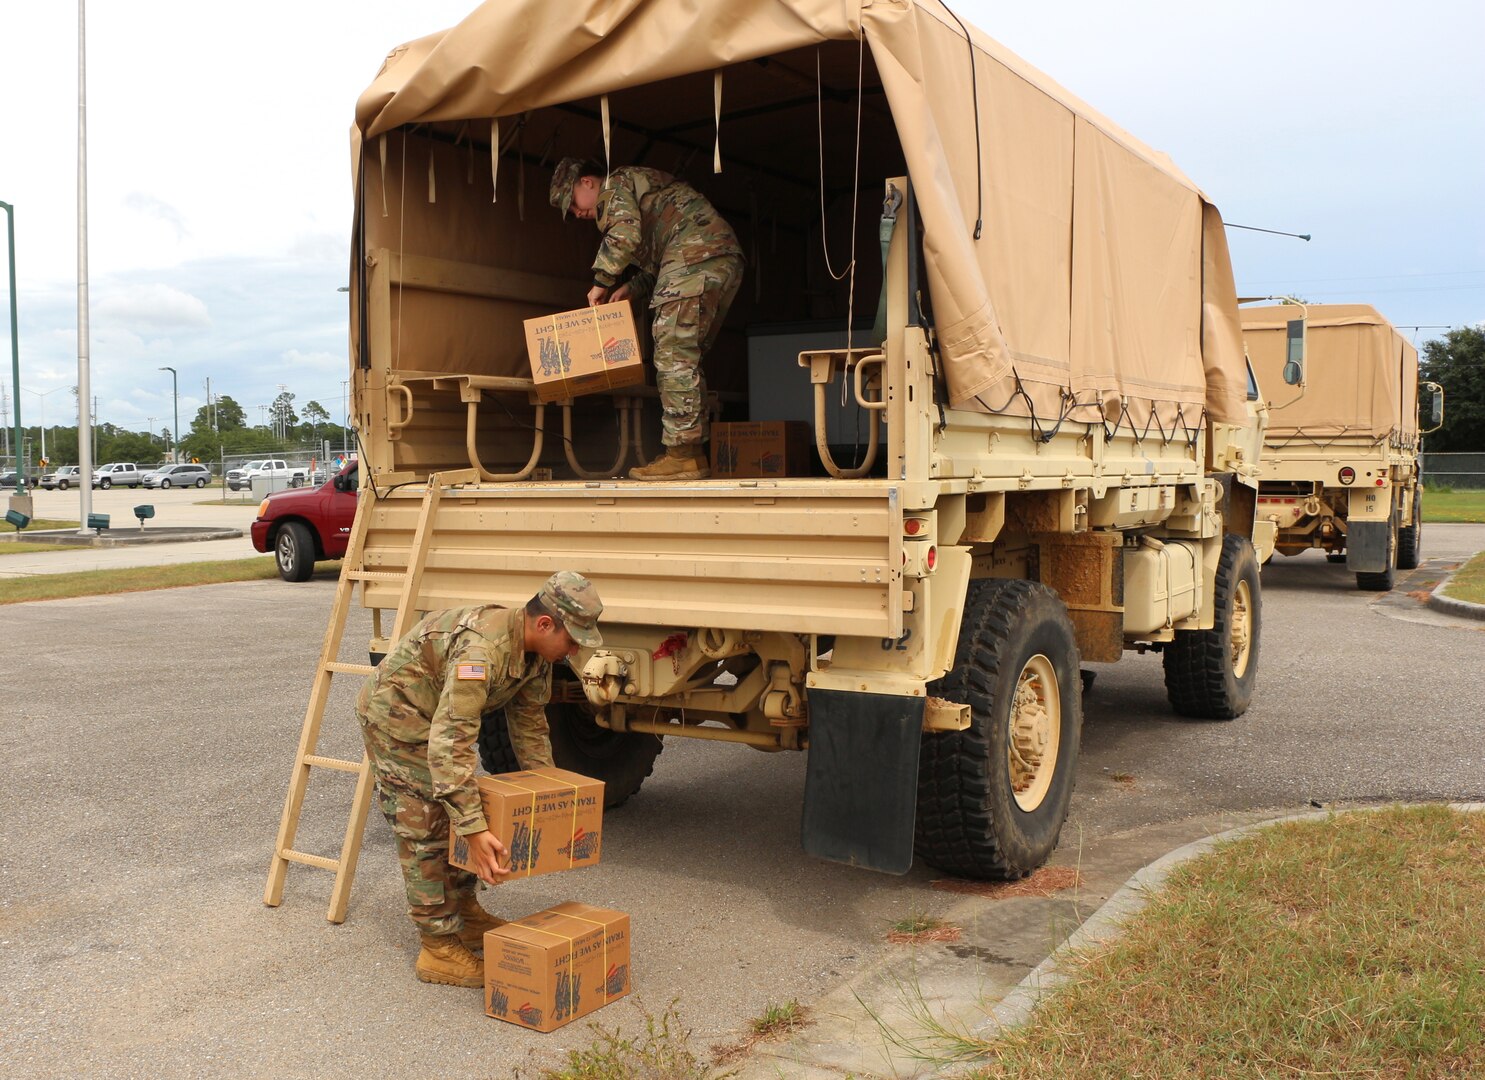 Mississippi National Guard Spc. Jan Lao and Pfc. Mckenzie Smith of the 890th Engineer Battalion load supplies onto a Light Medium Tactical Vehicle in Gulfport, Miss., Sep. 14, 2020. The Soldiers will be part of a 10-person team on standby to rescue residents from flooded areas due to Hurricane Sally.